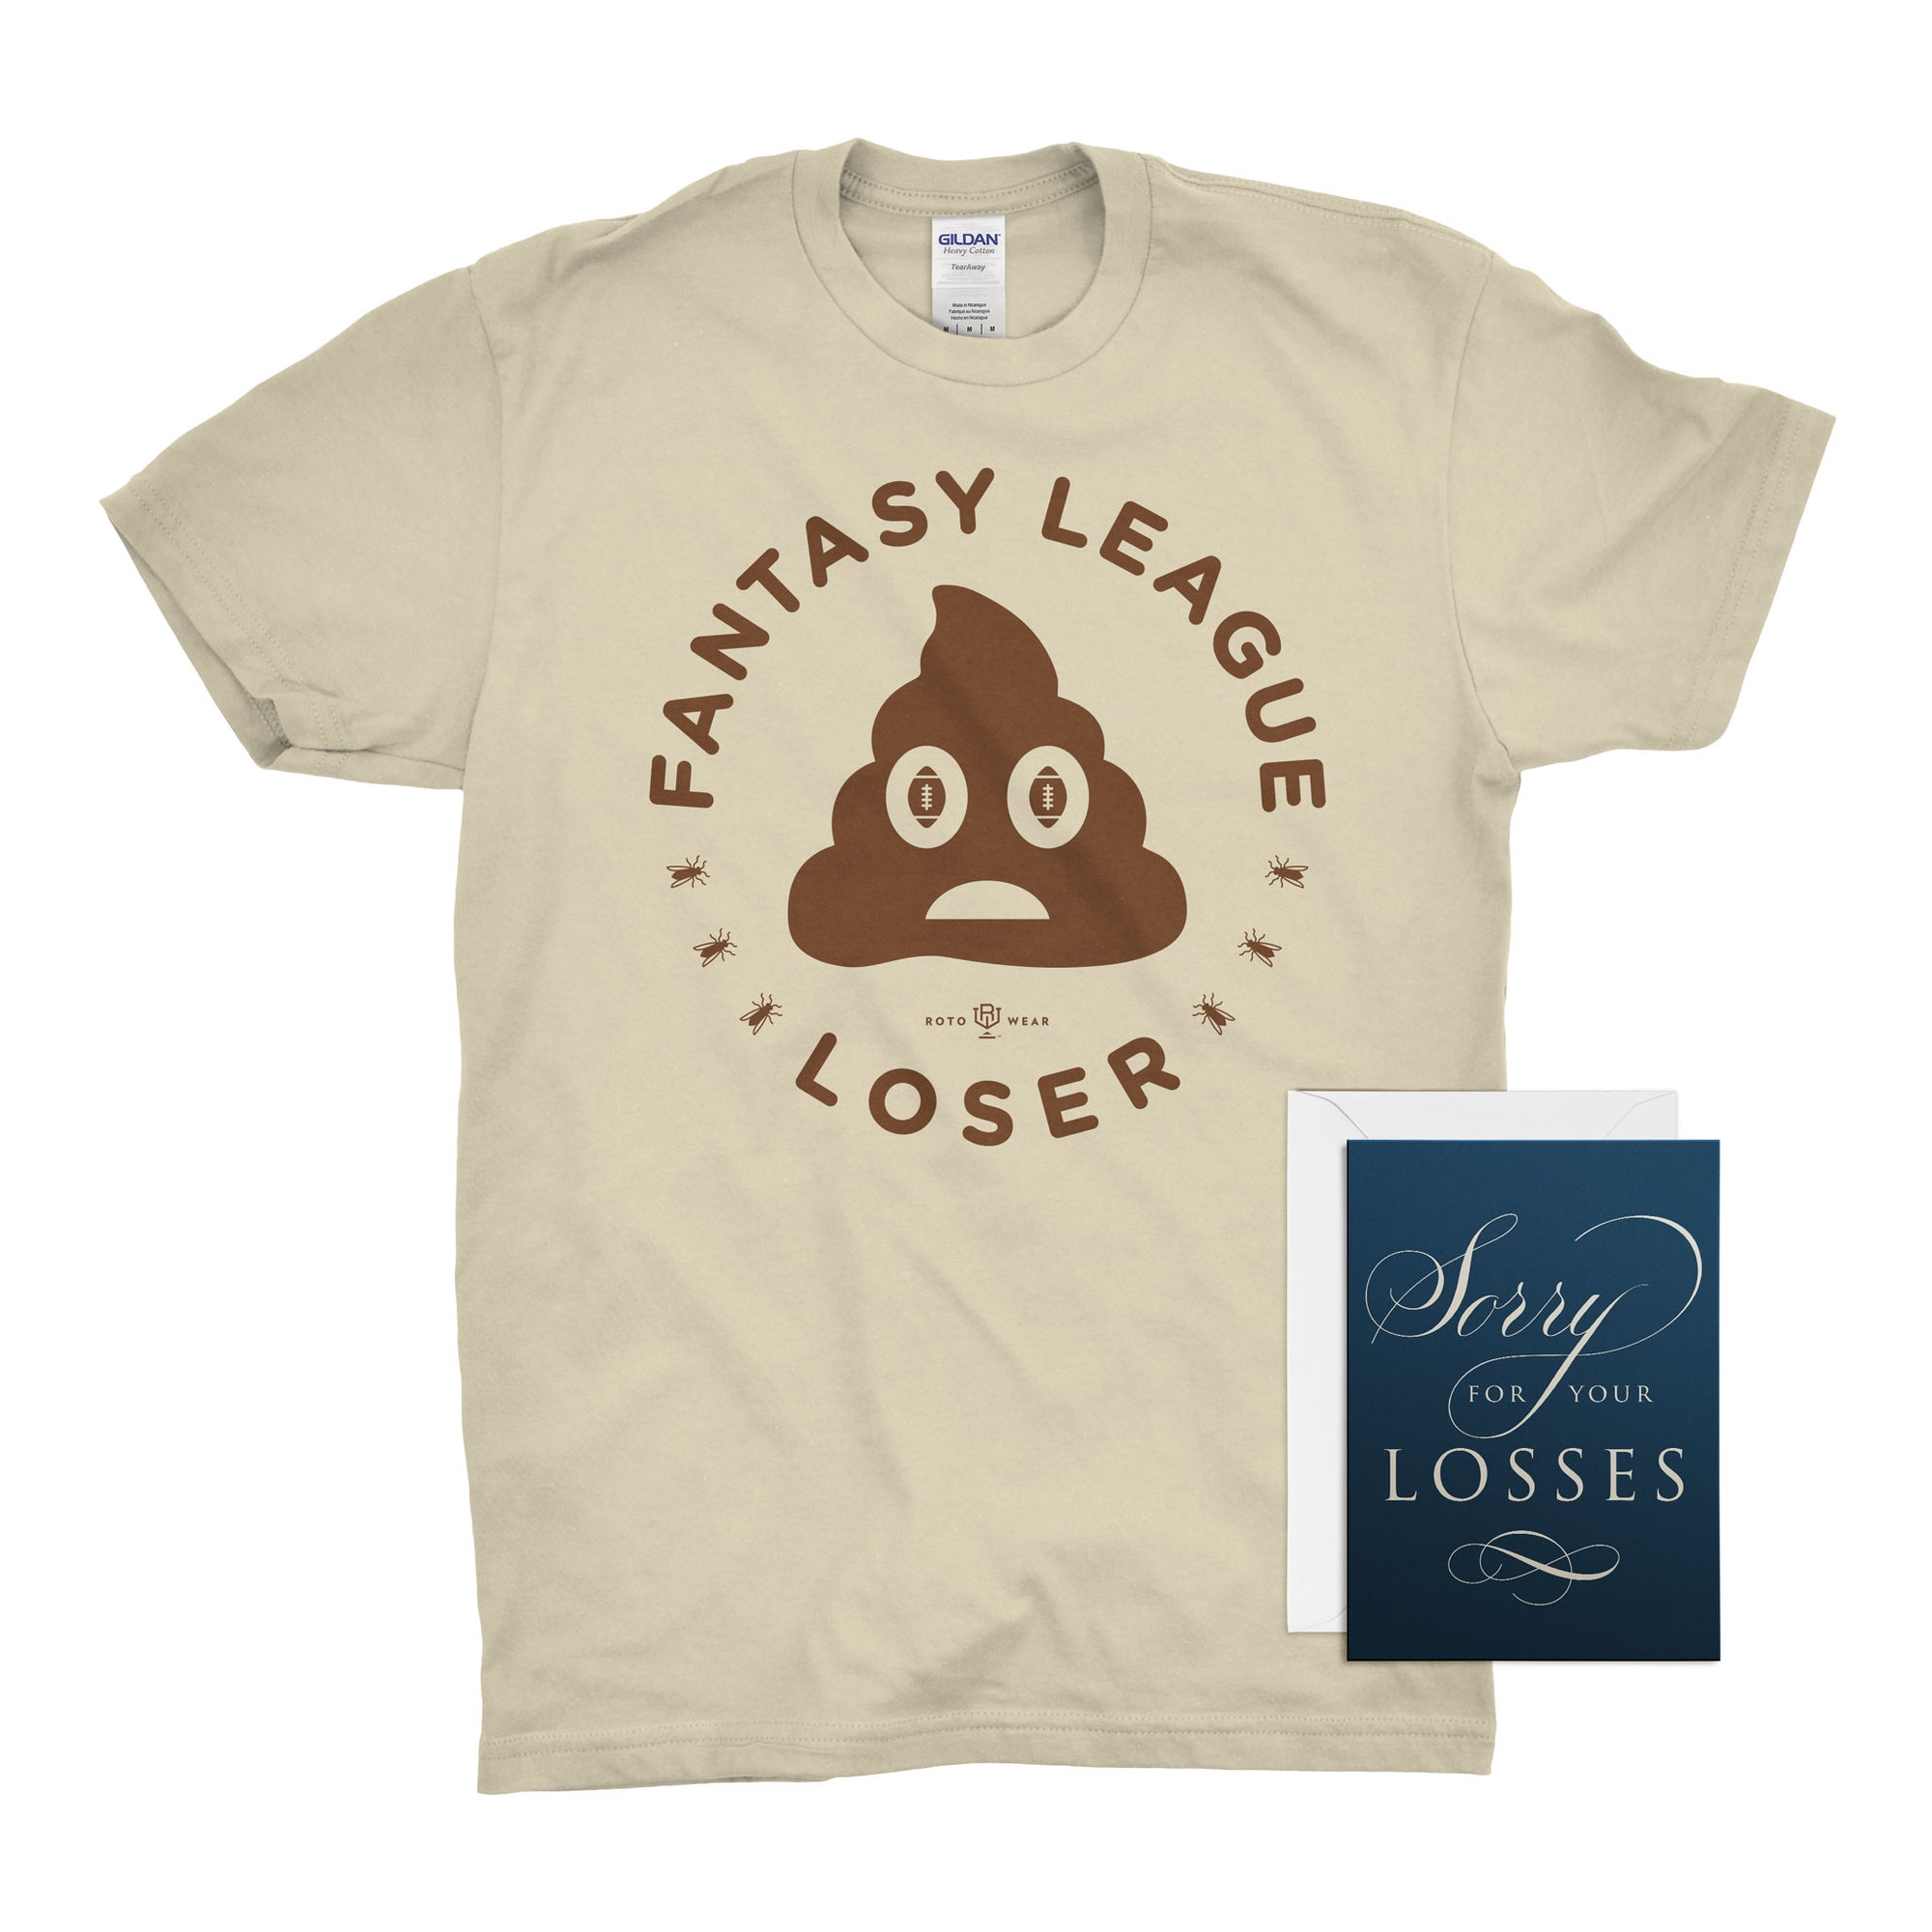 Fantasy League Loser men’s t-shirt by RotoWear, the perfect funny gift for the last place team in any fantasy football league